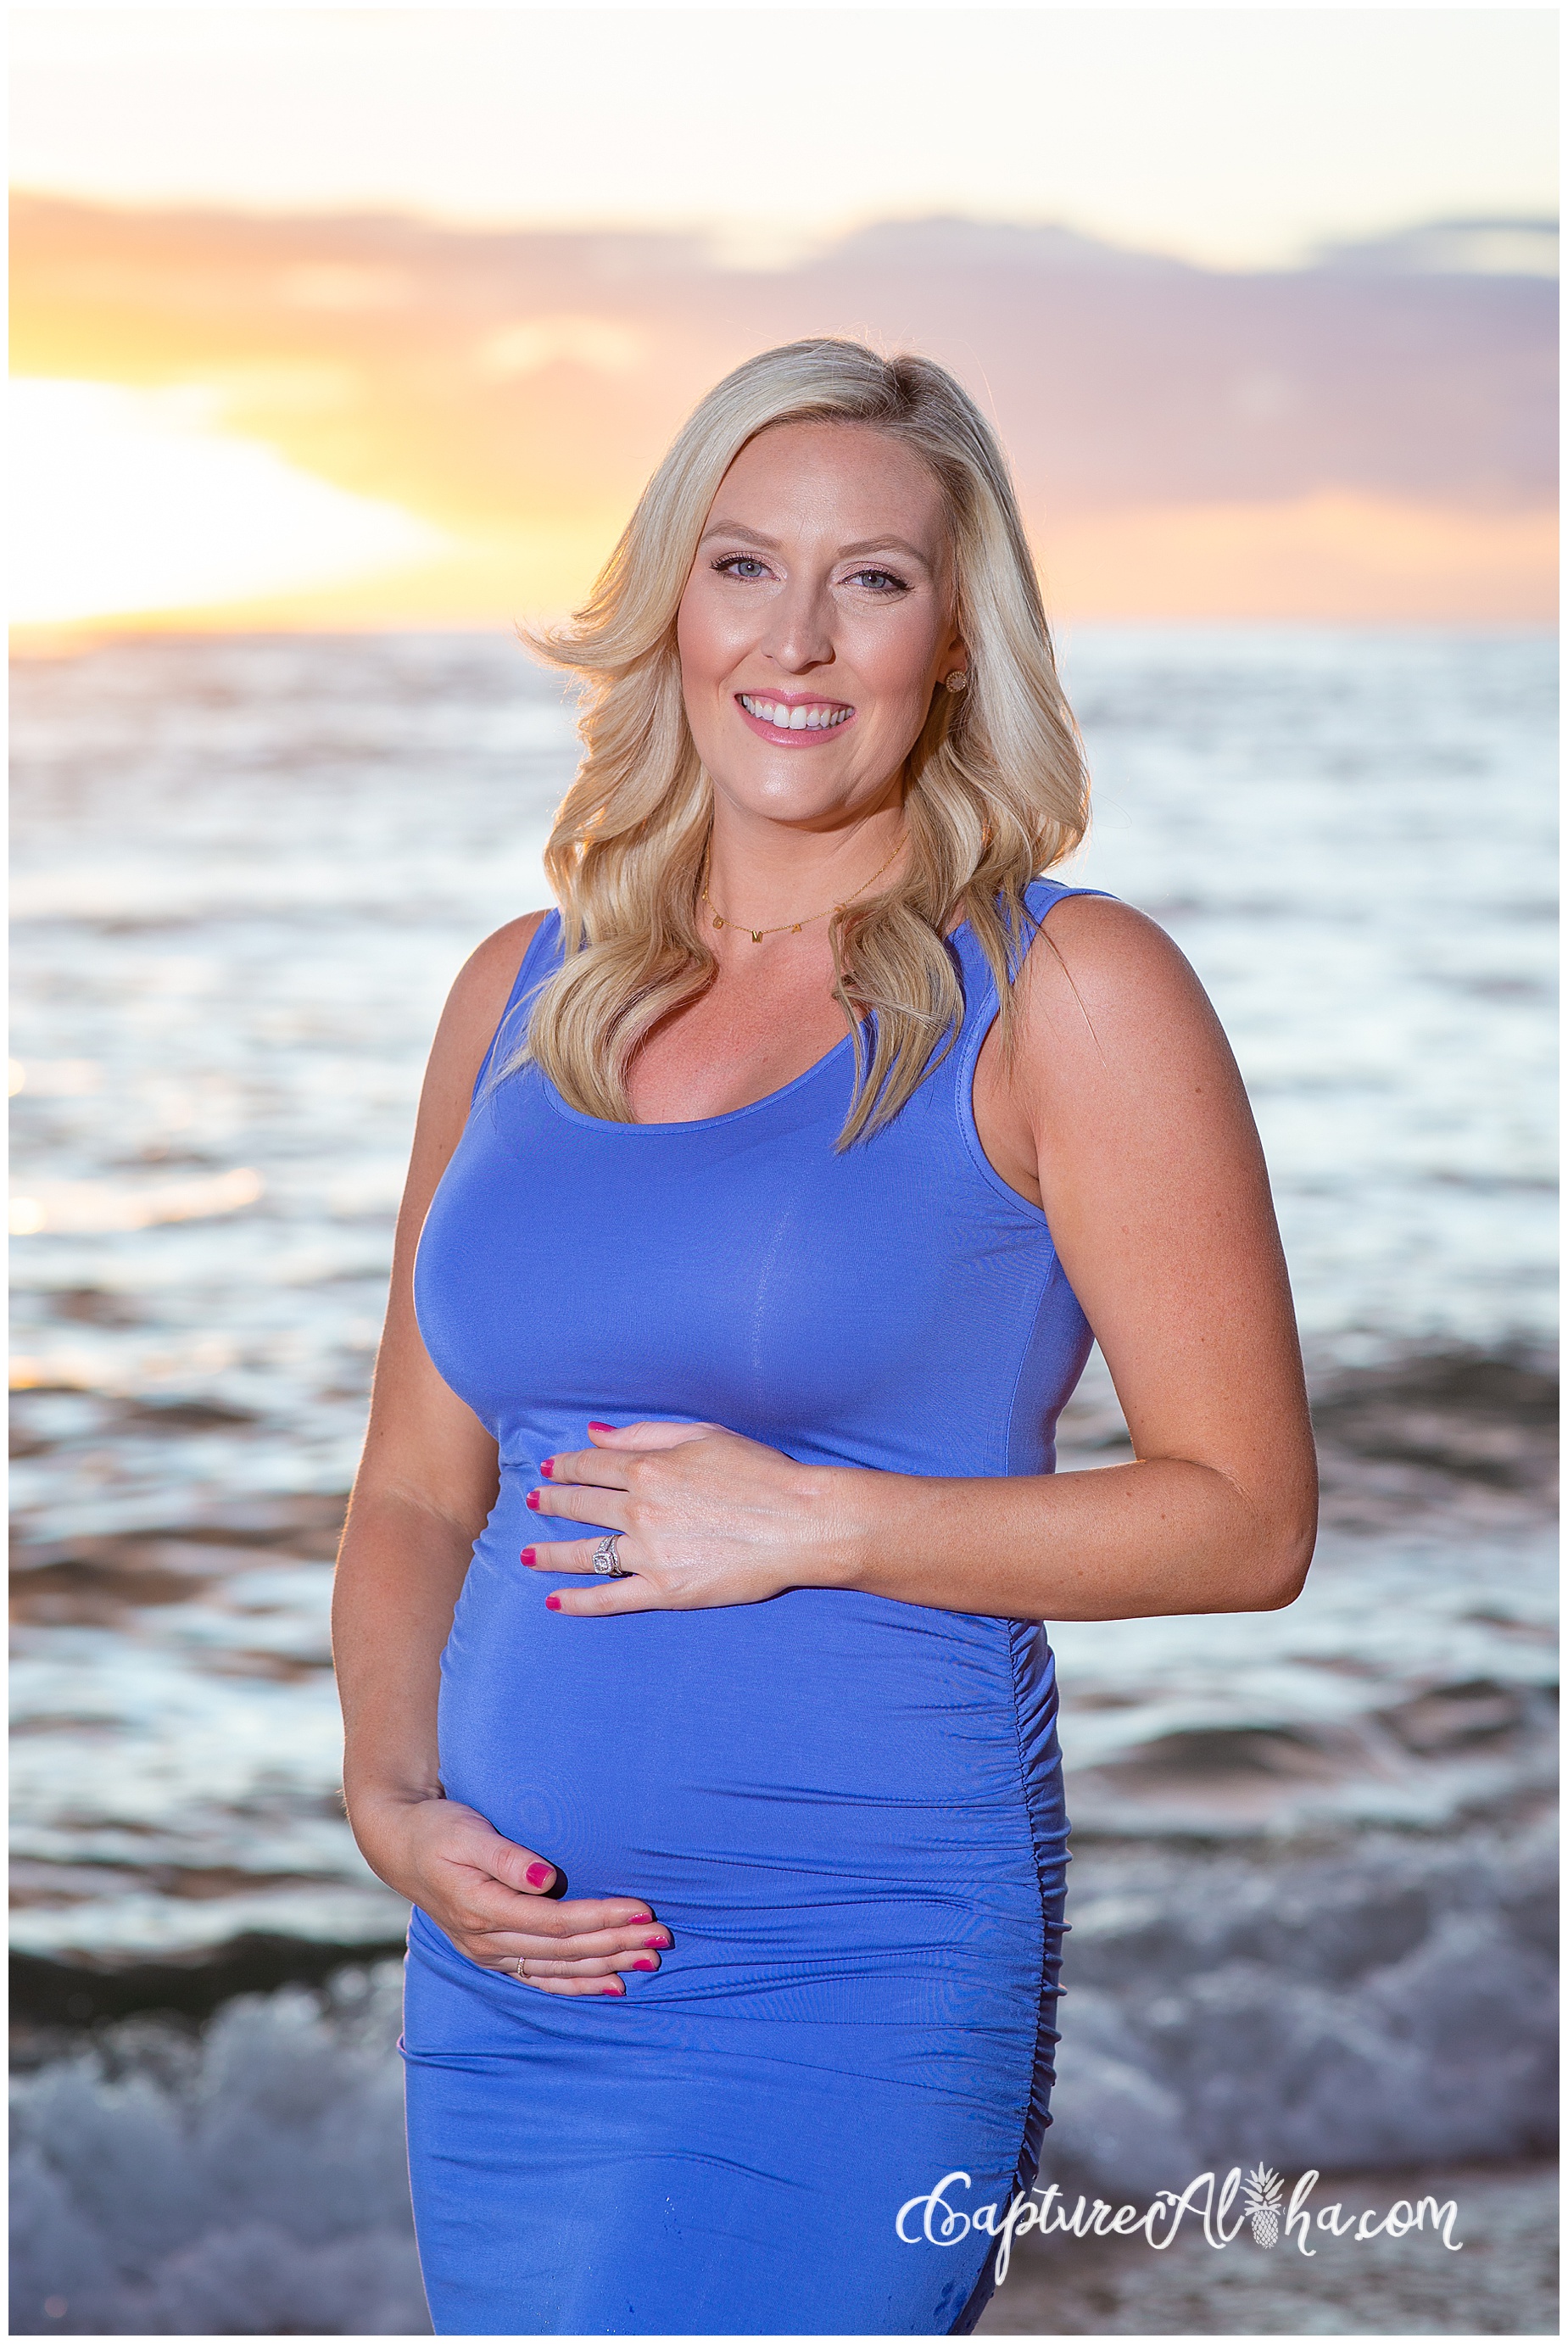 Pregnant woman on the beach in Maui wearing a blue dress during sunset